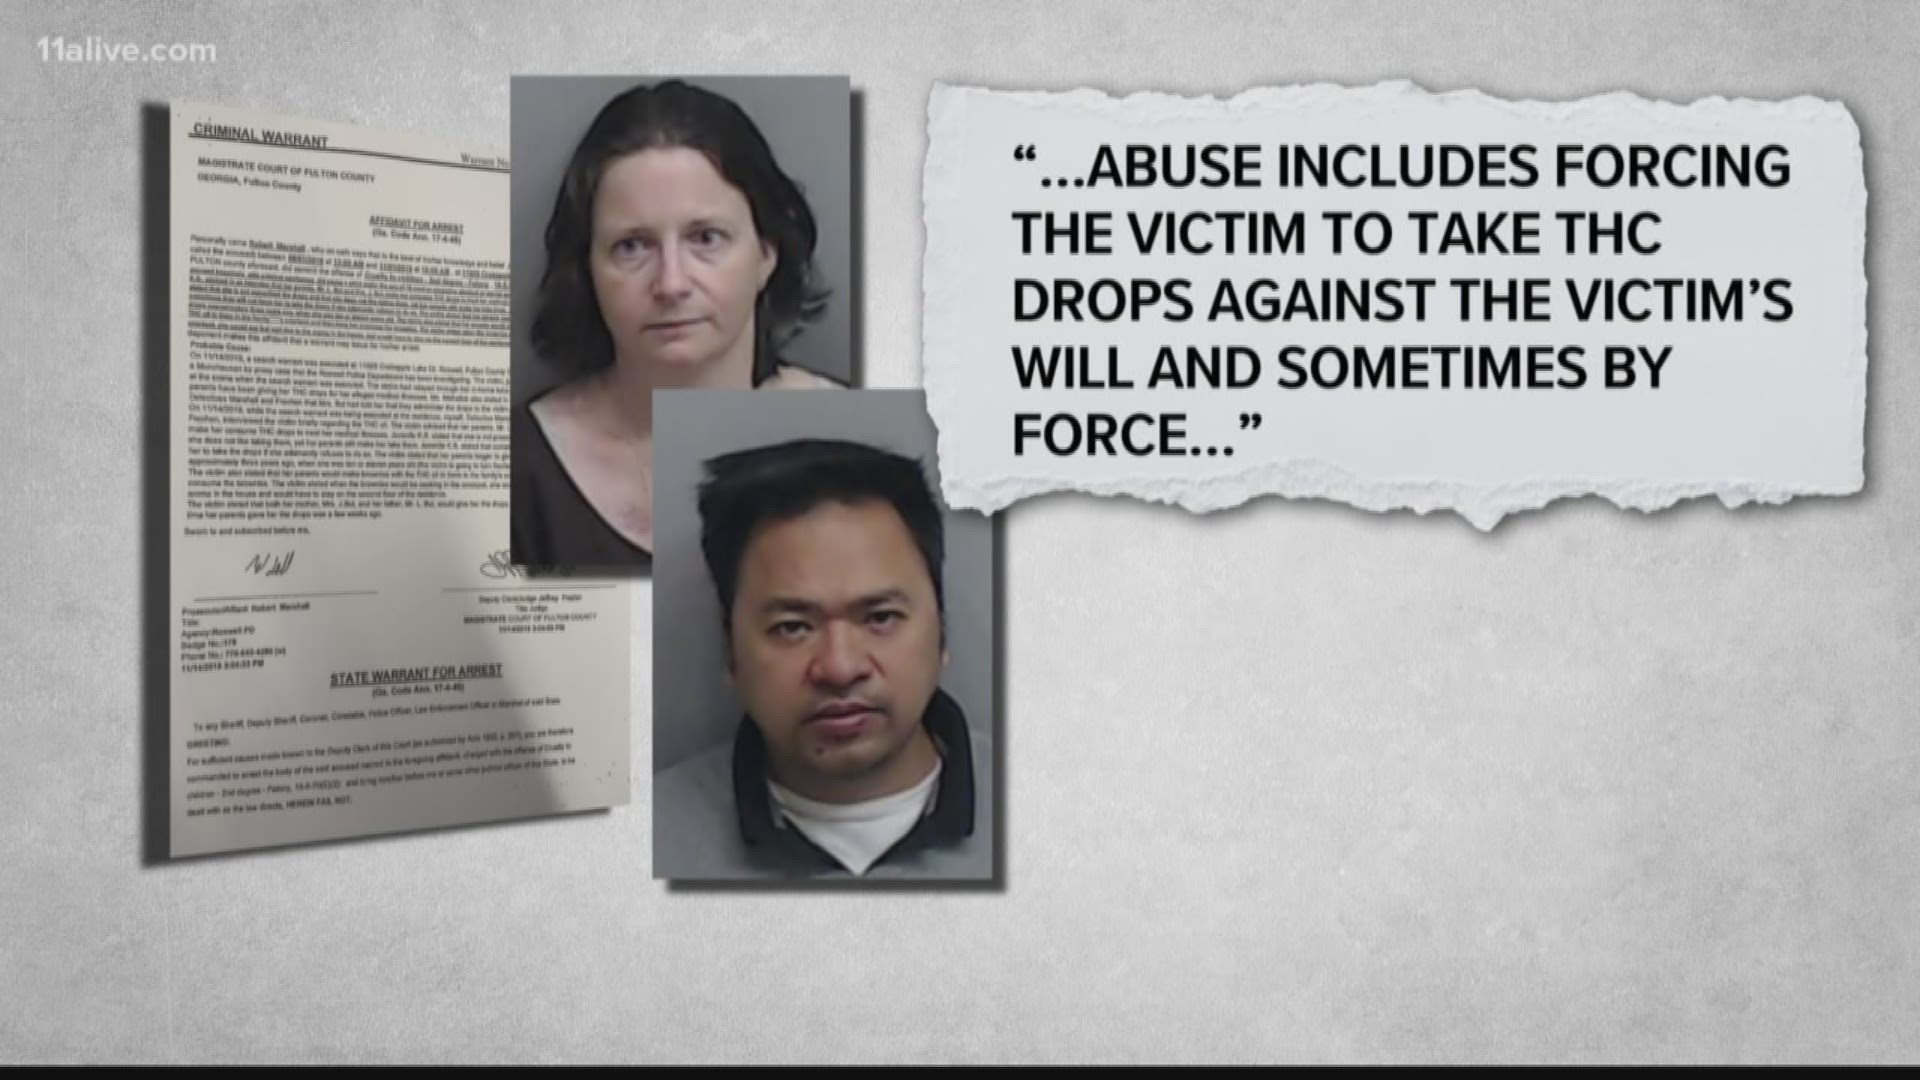 The mother is also accused of lying to get more pain medications for the victim.